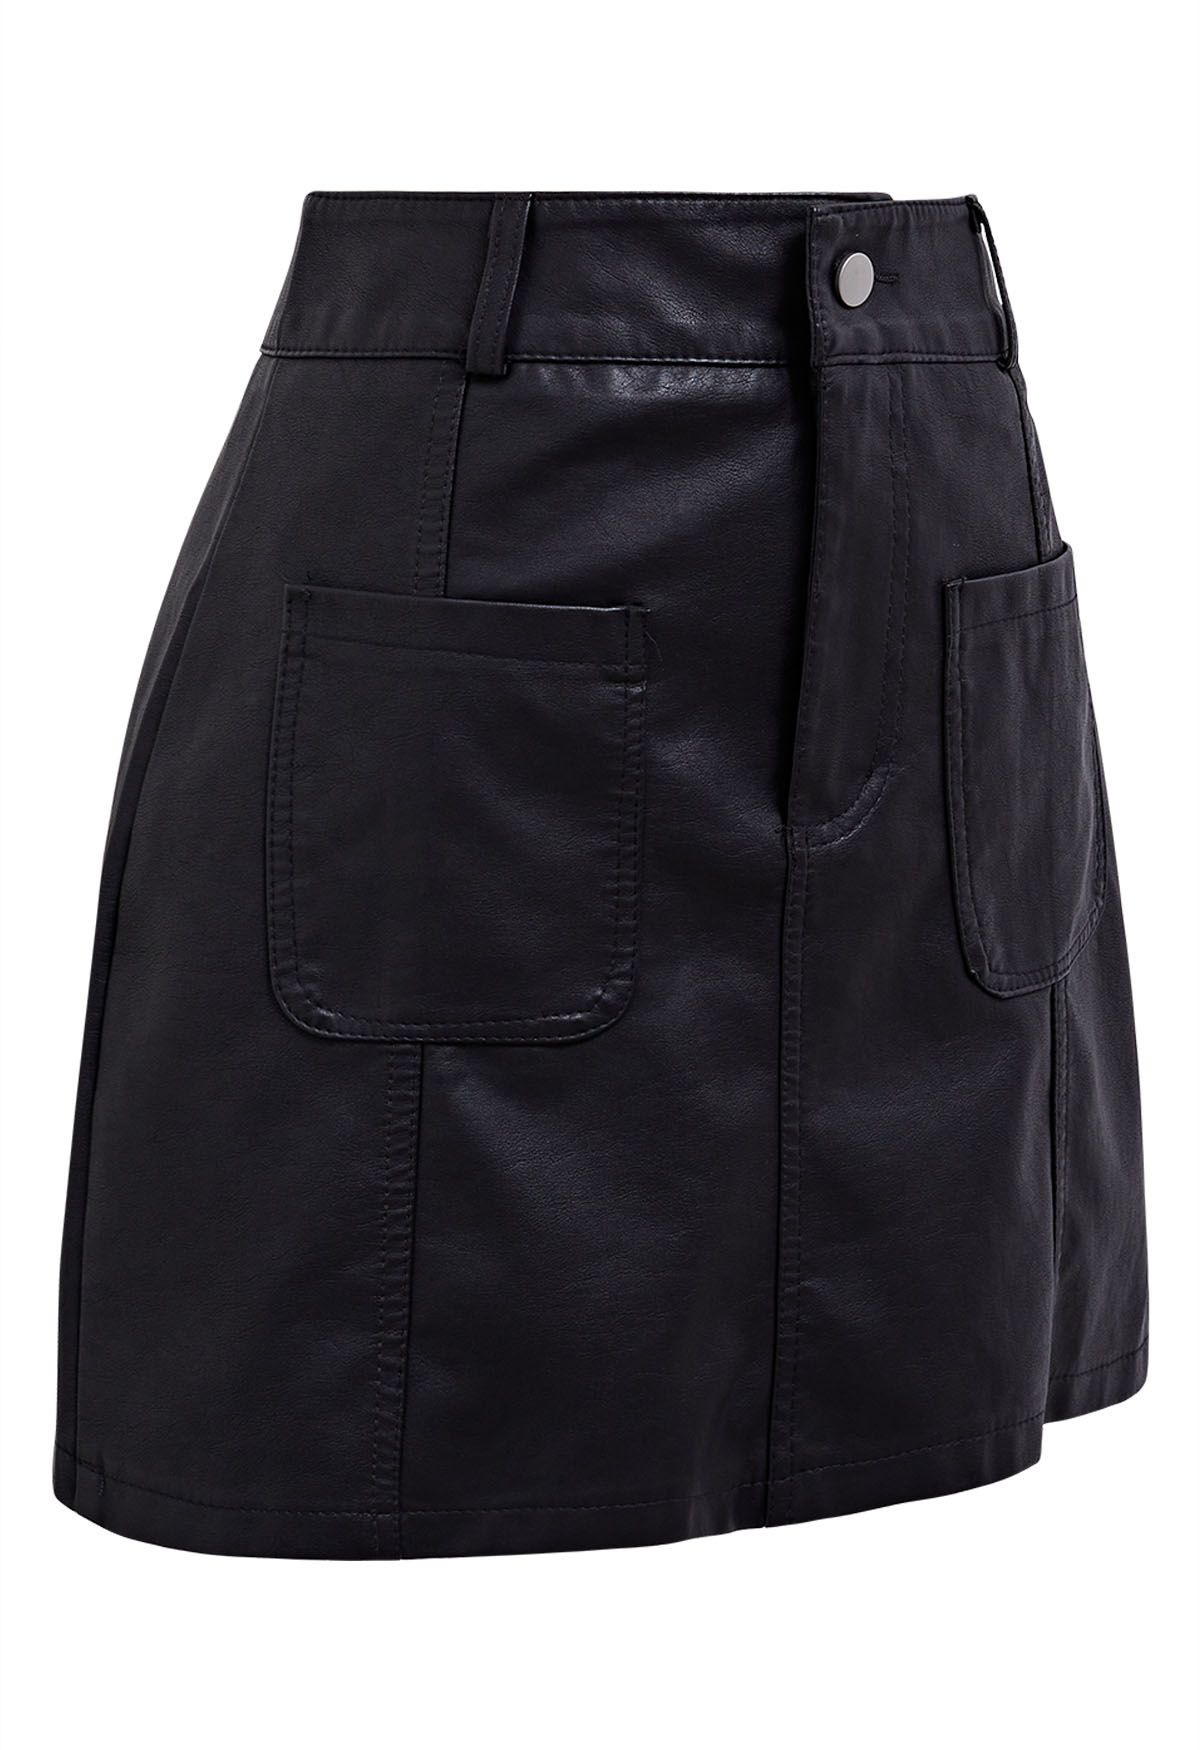 Patch Pocket Faux Leather Mini Skirt in Black